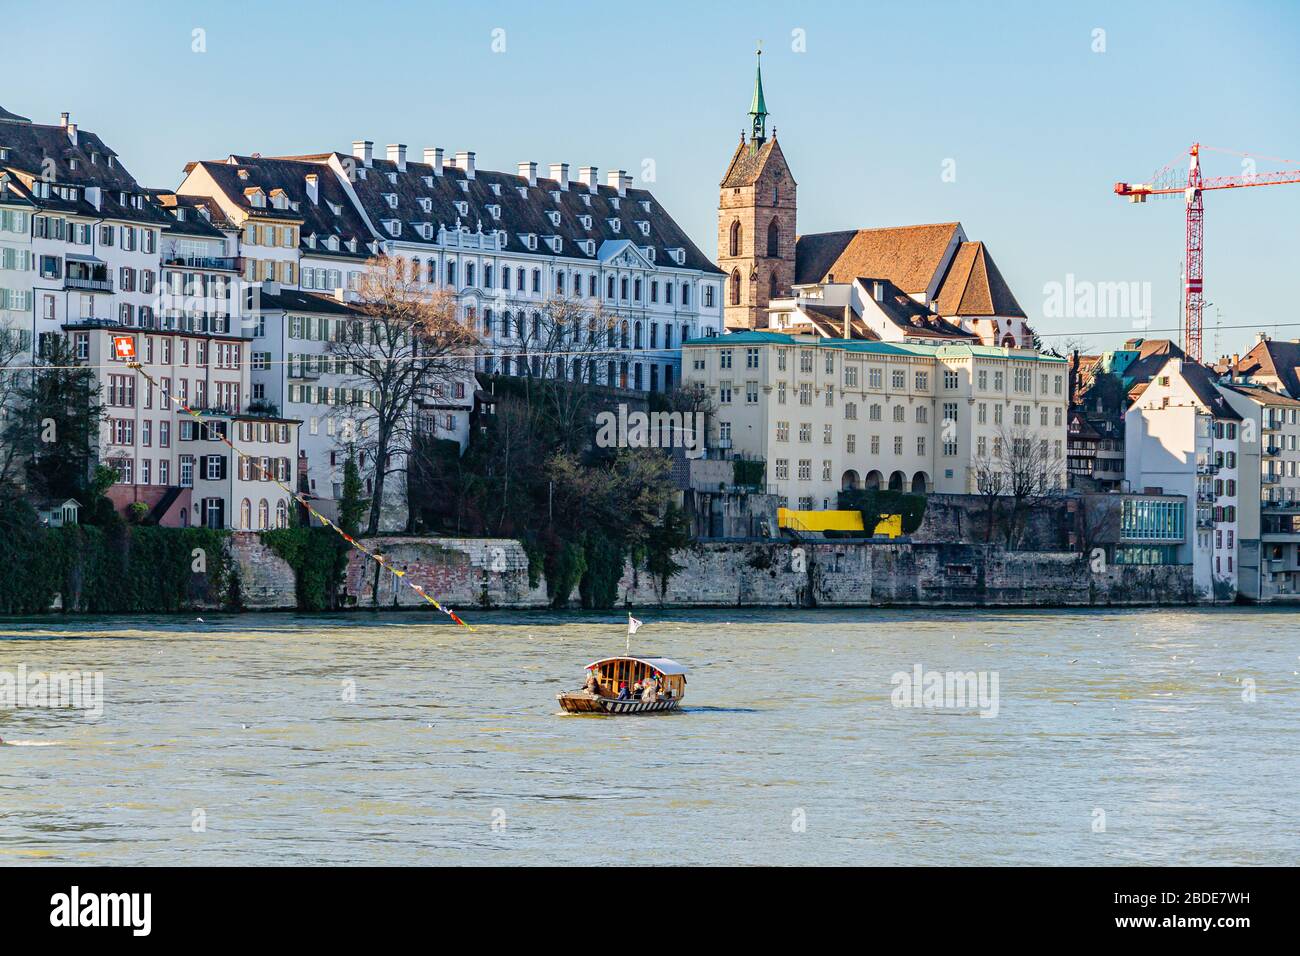 One of four cable ferries that cross the river Rhine in central Basel, with the minster / cathedral behind. Basel, Switzerland. February 2020. Stock Photo